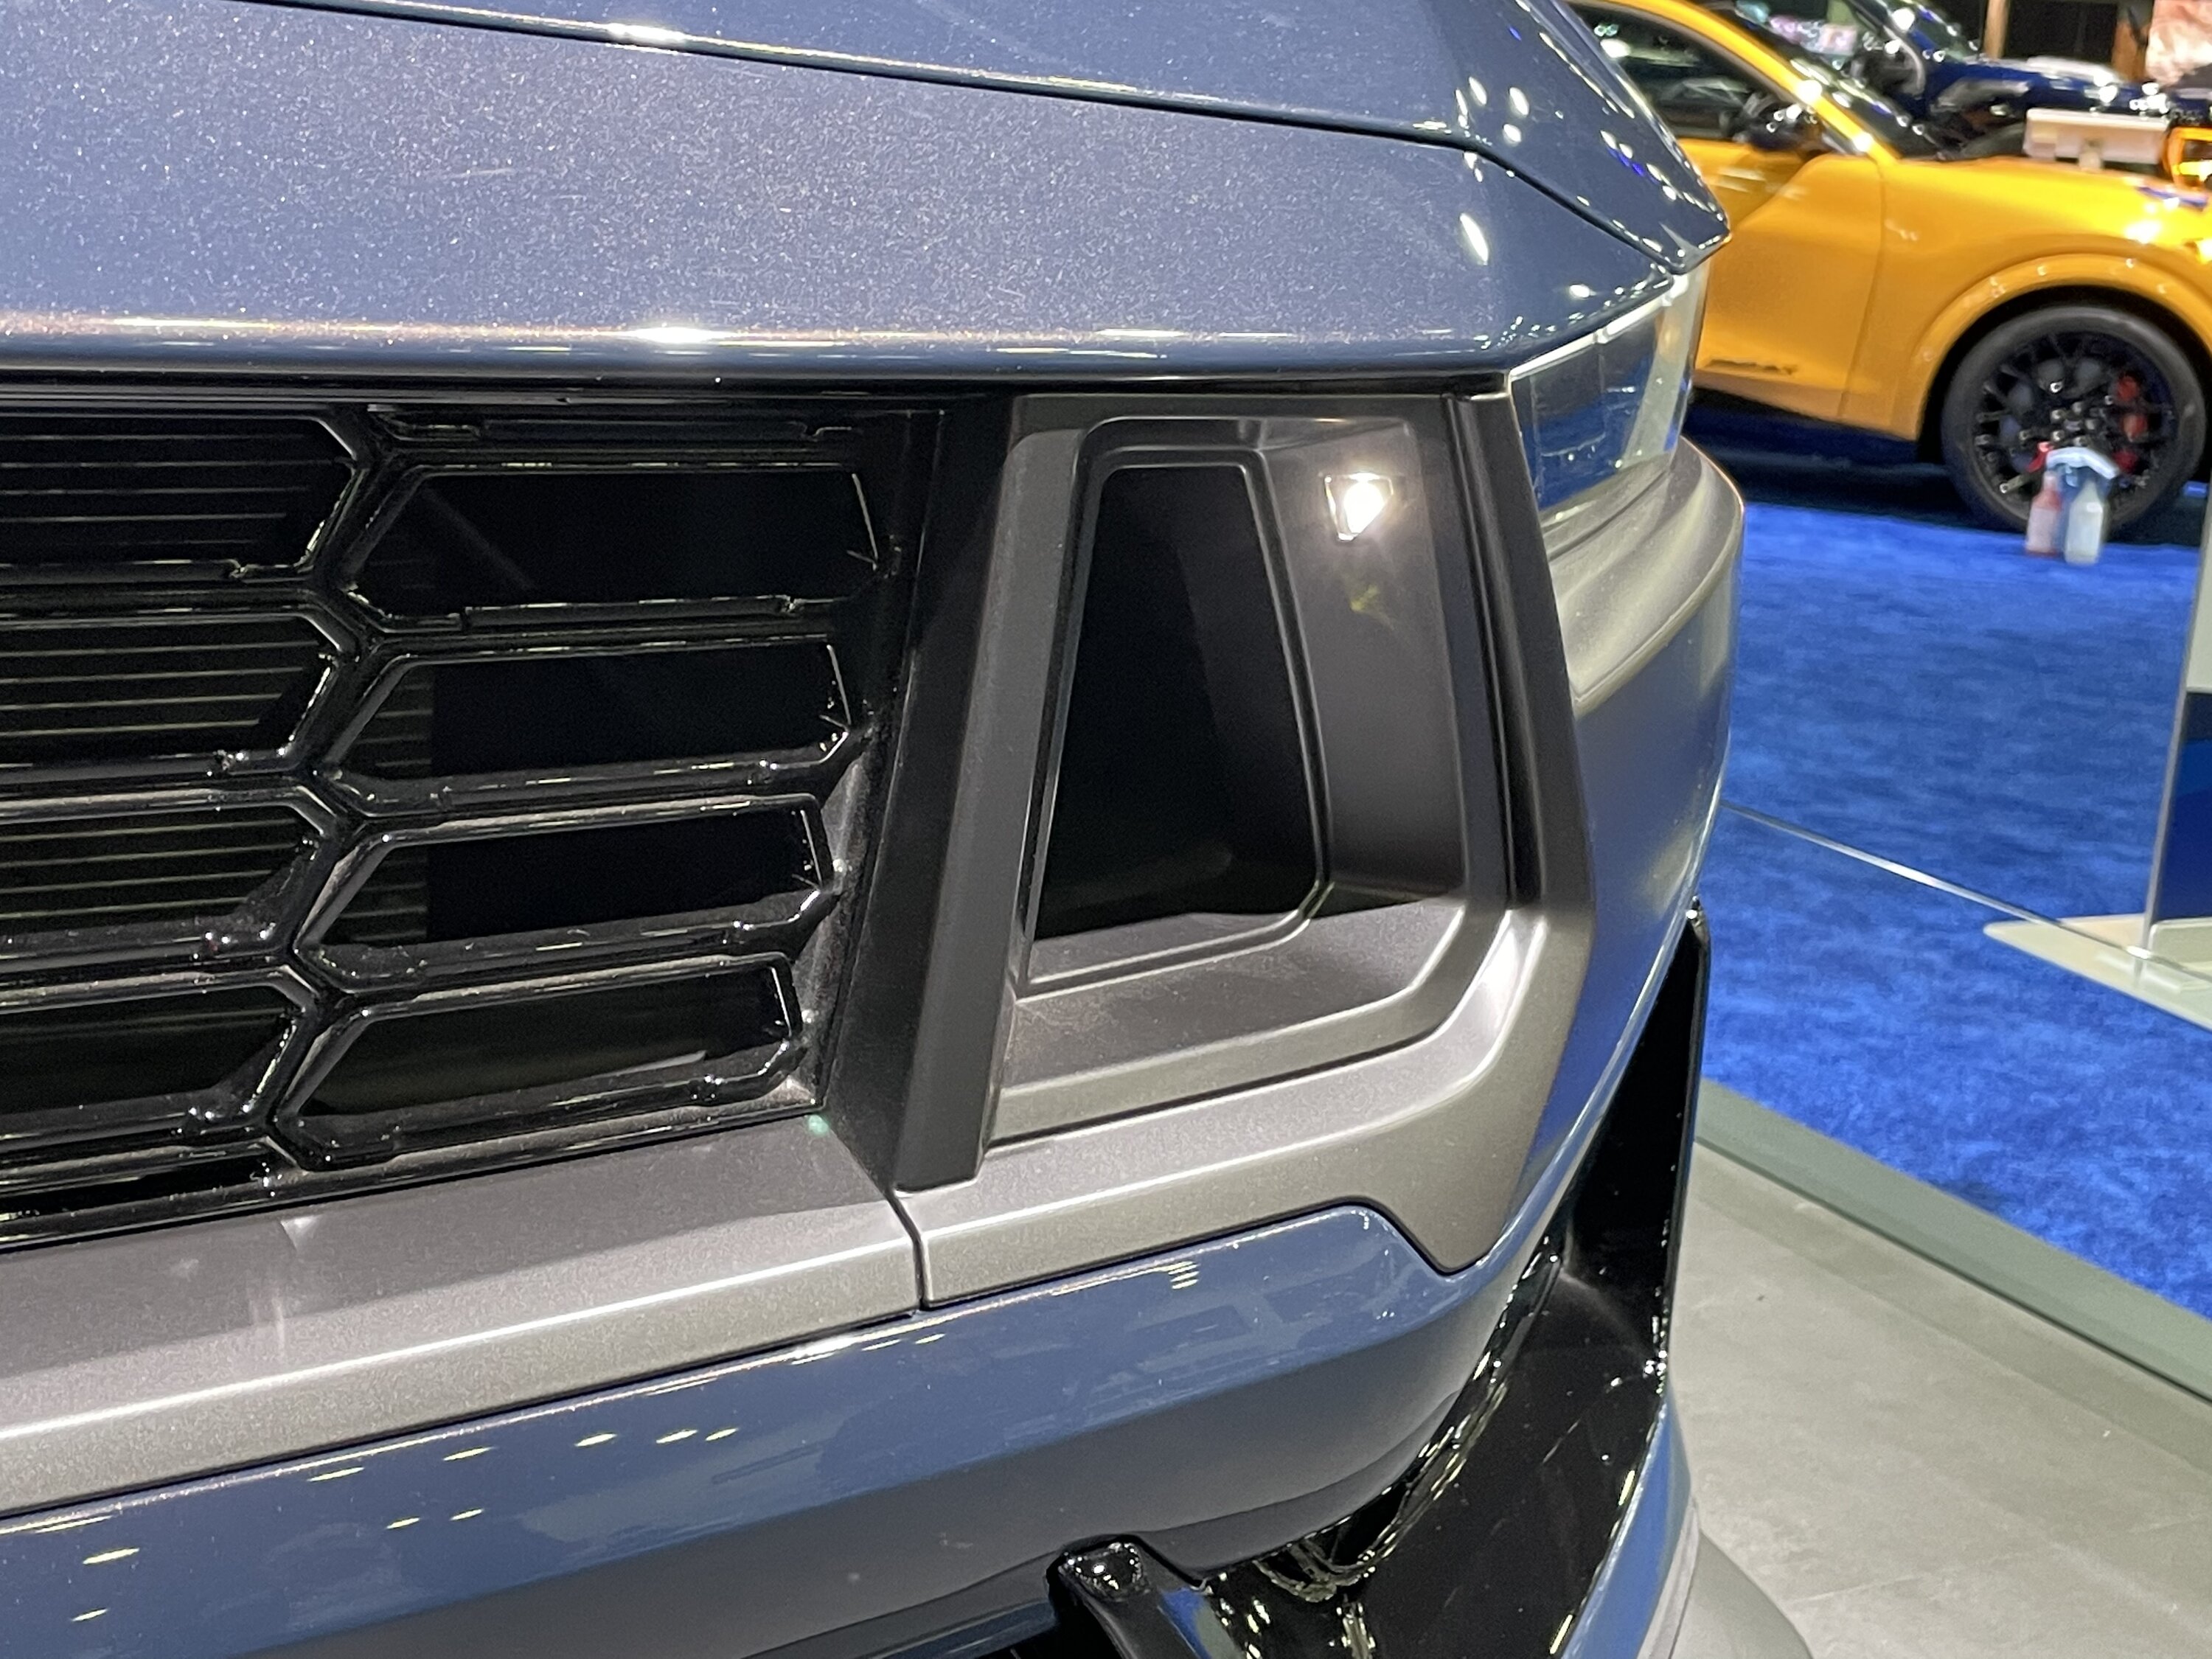 S650 Mustang S650 pics from reveal night and showfloor of 2022 Detroit Auto Show b4b72826-15d3-4eda-bbf0-451e9899d764-jpeg-